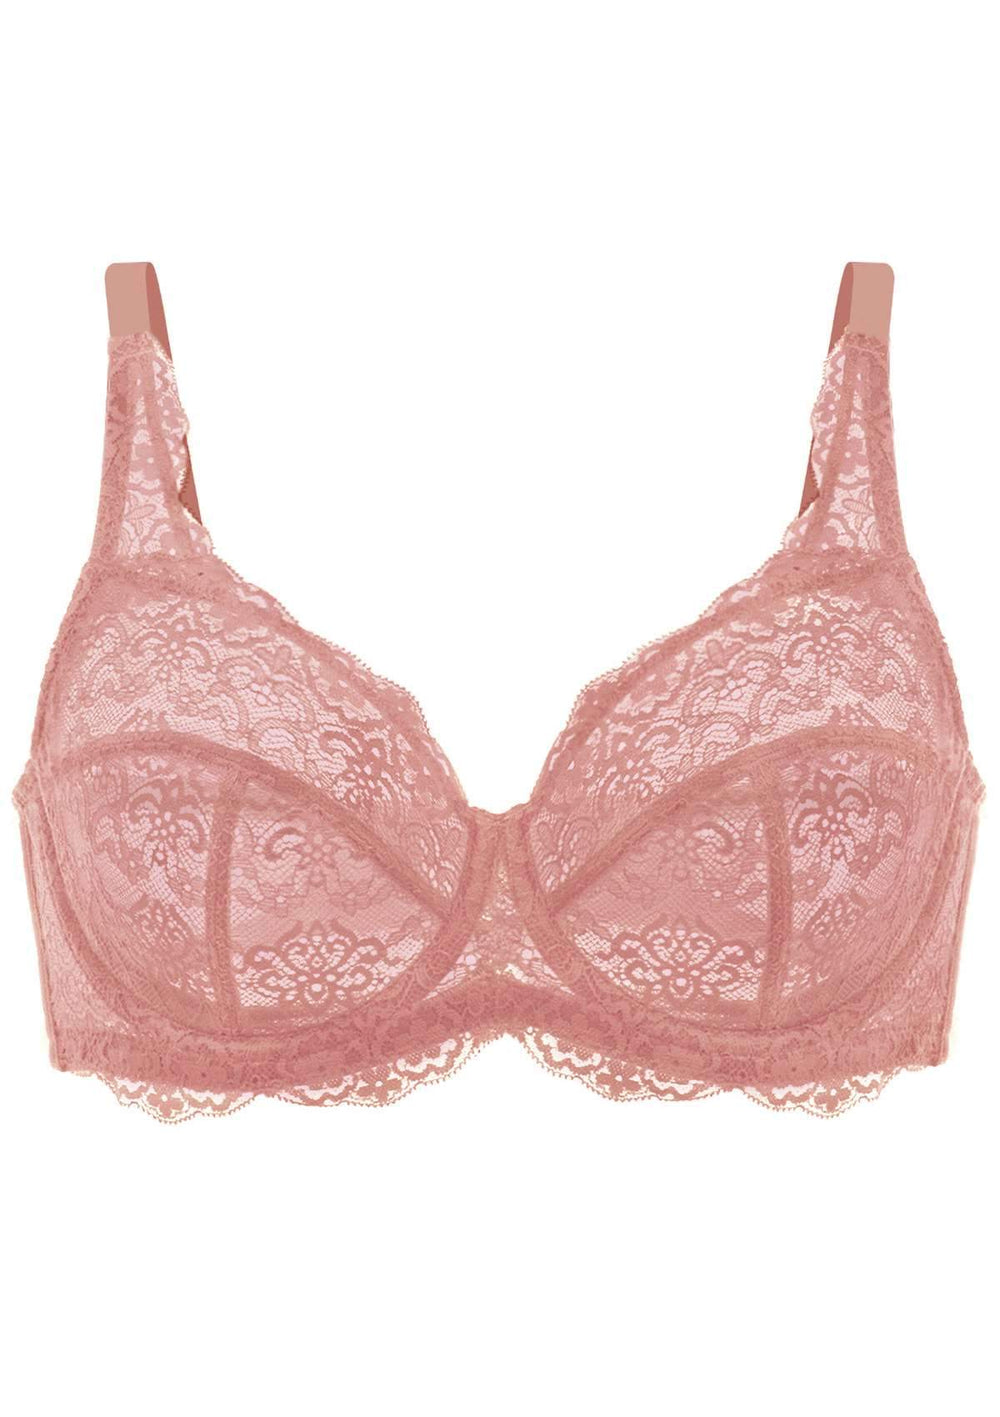 HSIA All-Over Floral Lace: Best Bra for Elderly with Sagging Breasts